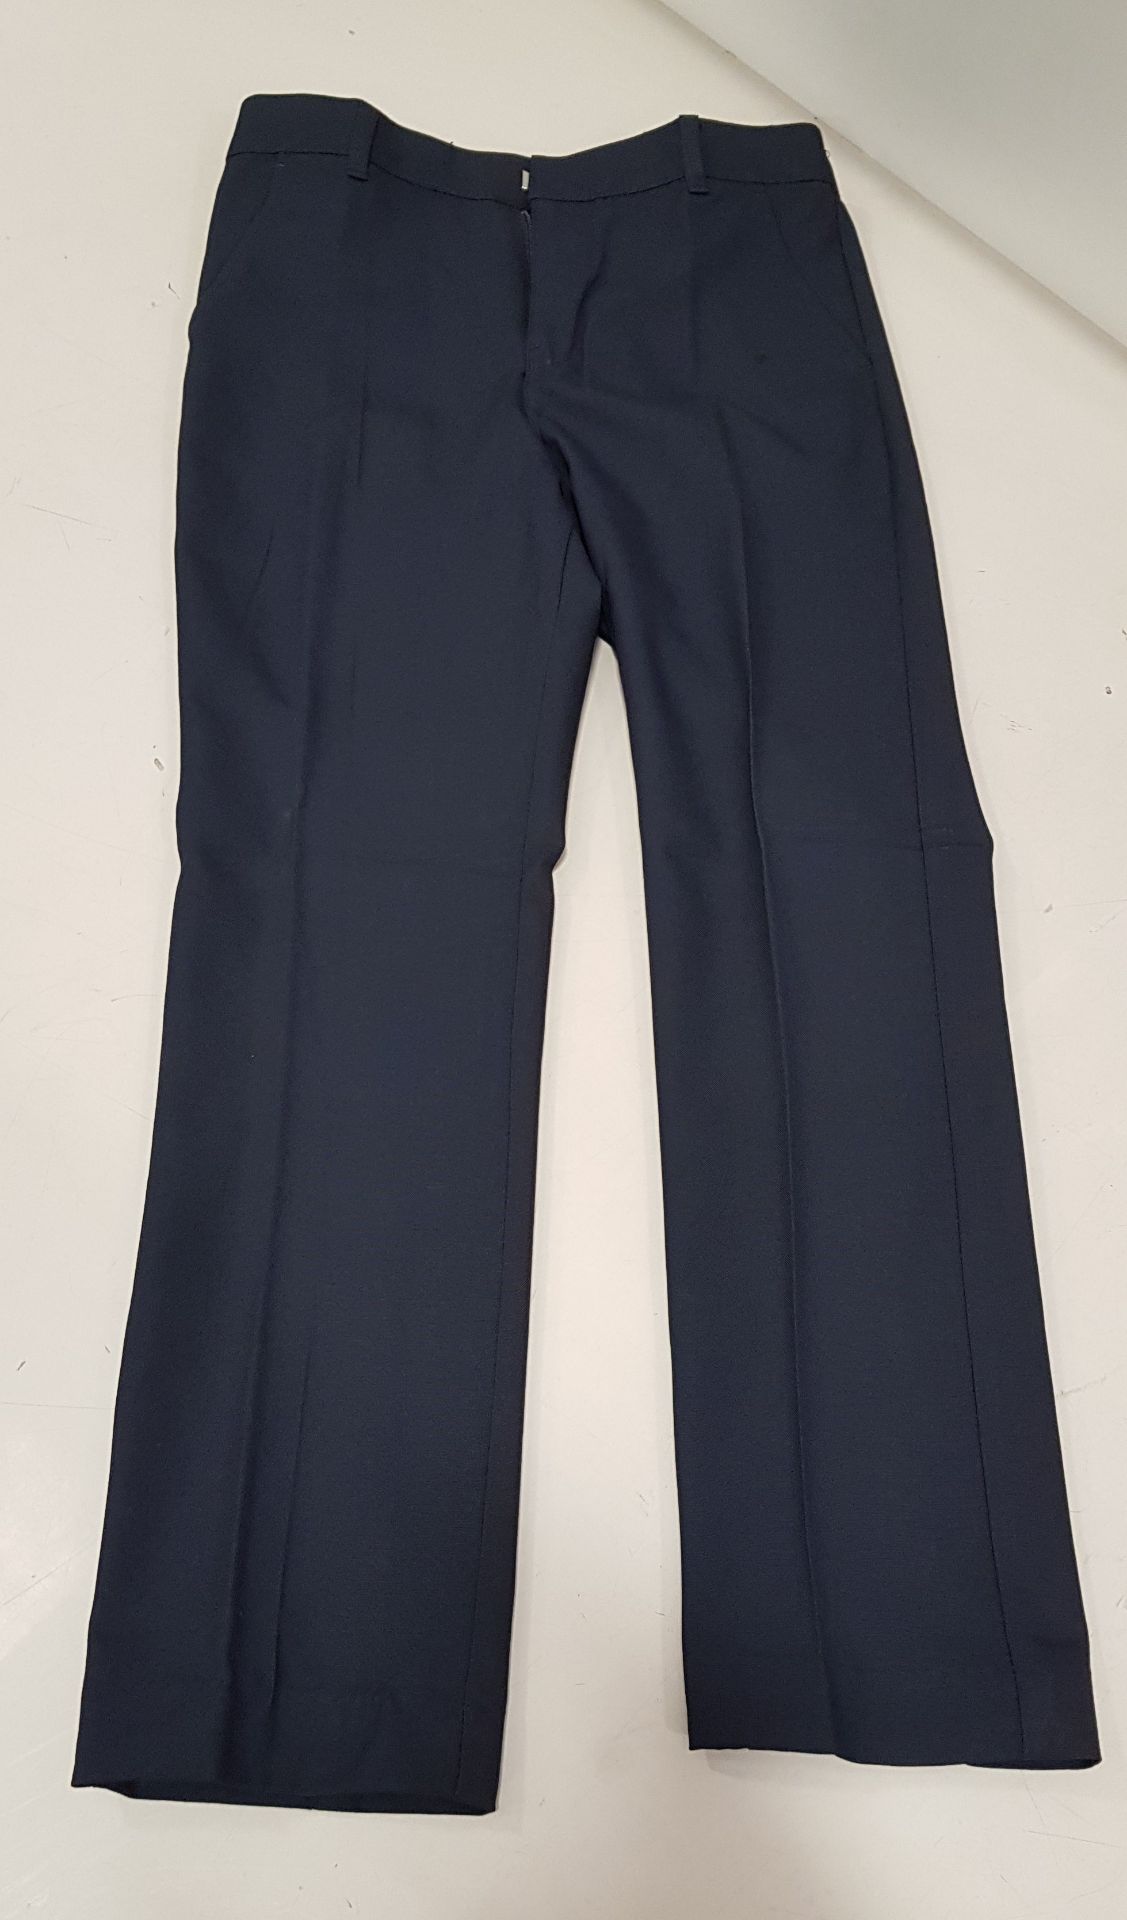 60 X BRAND NEW F&F PACKS OF 2 SLIM FIT BOYS TROUSERS IN NAVY ALL IN SIZE 9-10 YRS ( RRP £9.00 -TOTAL